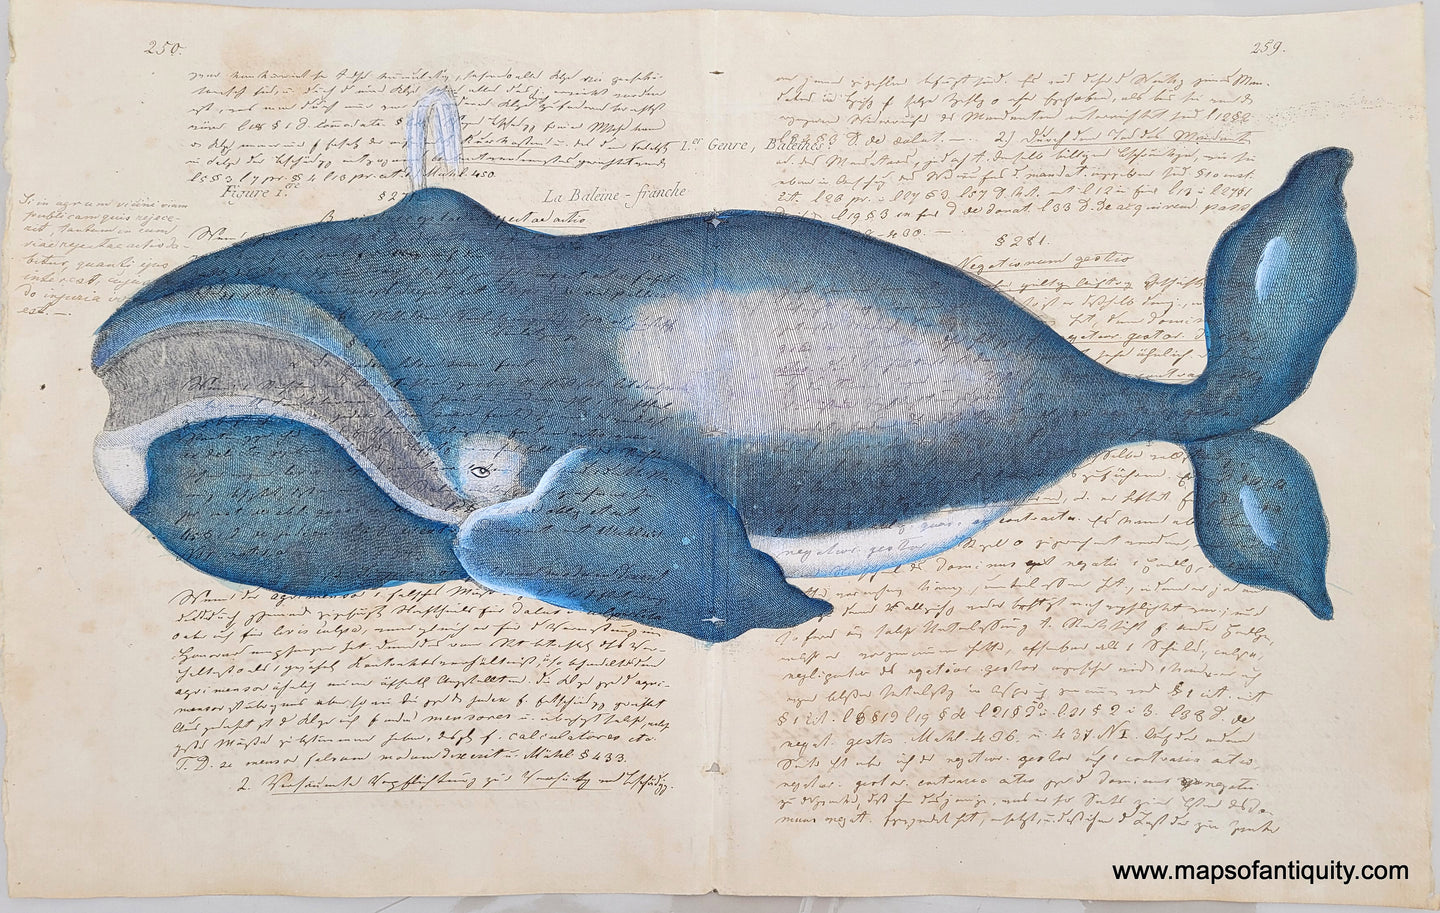 Reproduction-Antique-Print-Prints-Ledger-Notebook-Paper-Maps-Antiquity-Whales-Whaling-Whale-North-Atlantic-Right-Whale-Bowhead-Whale